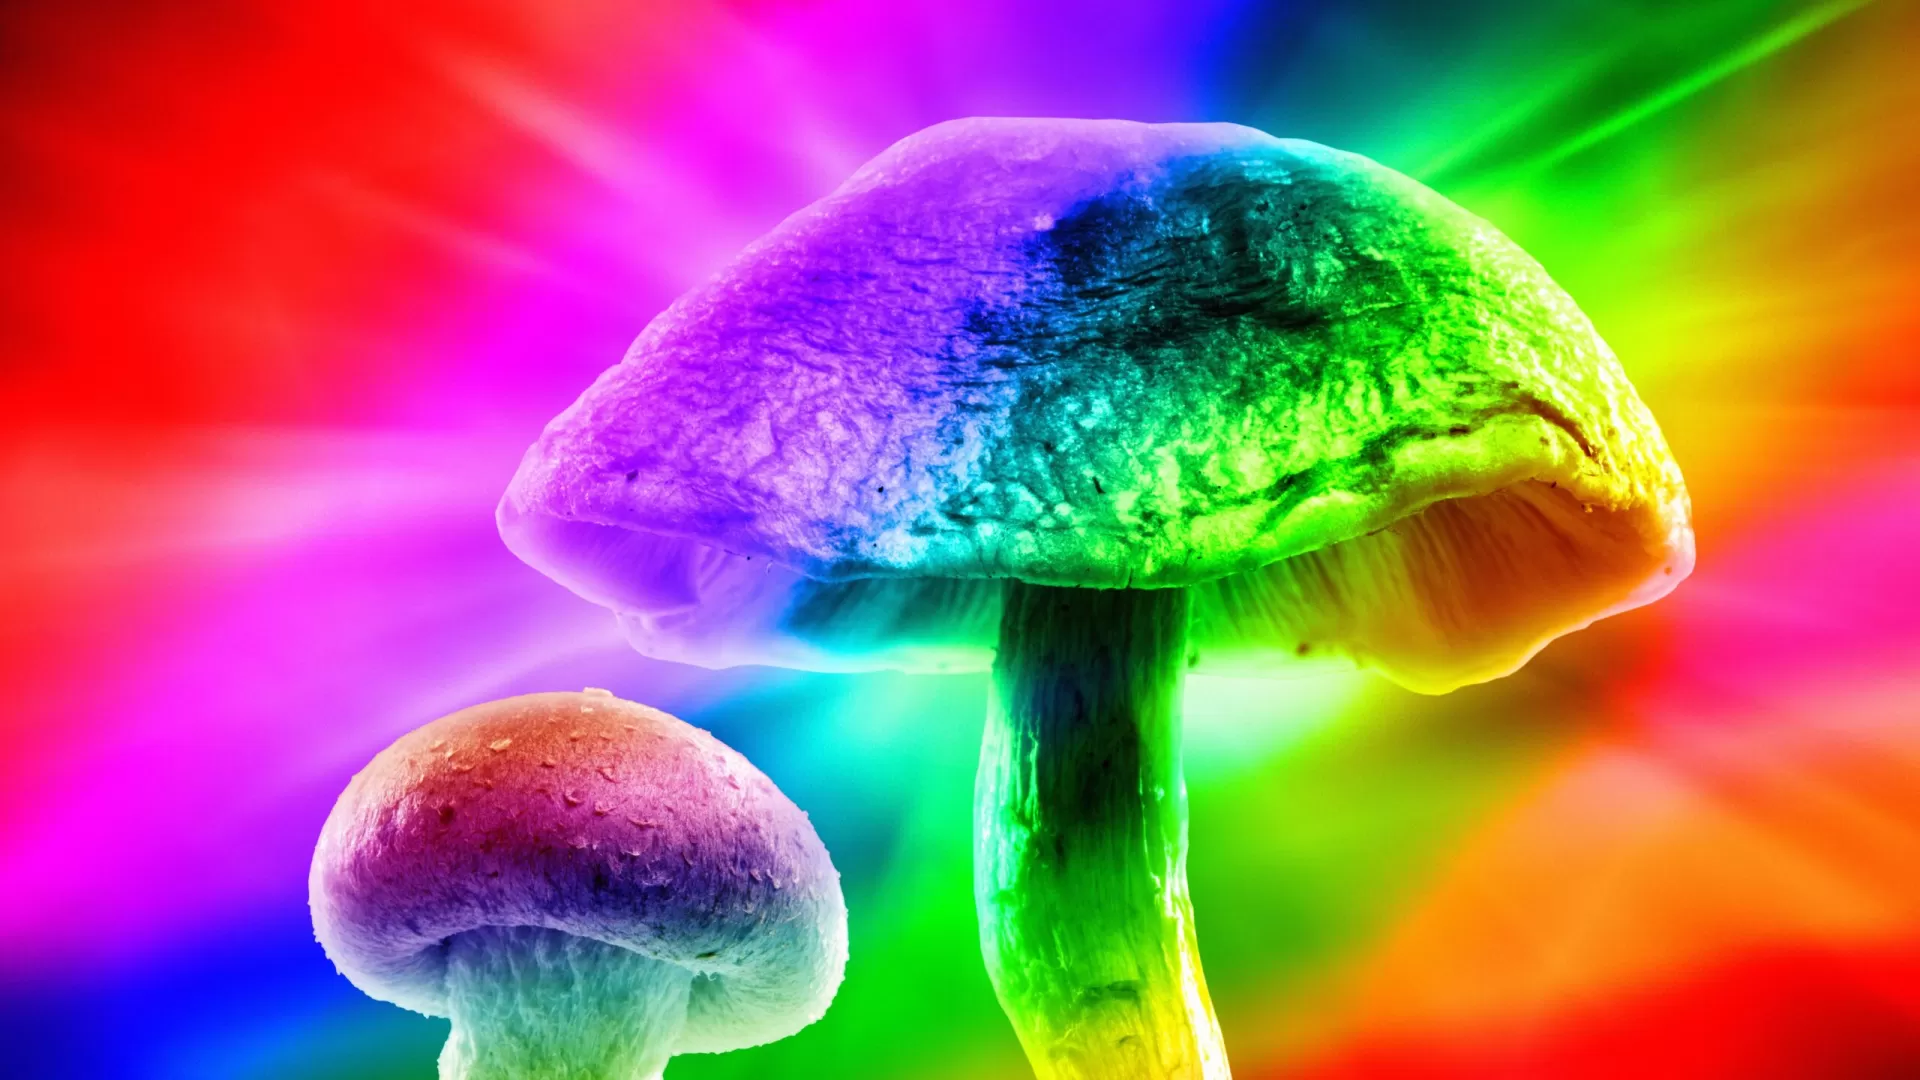 Psilocybin mushrooms with intense colors and flares added